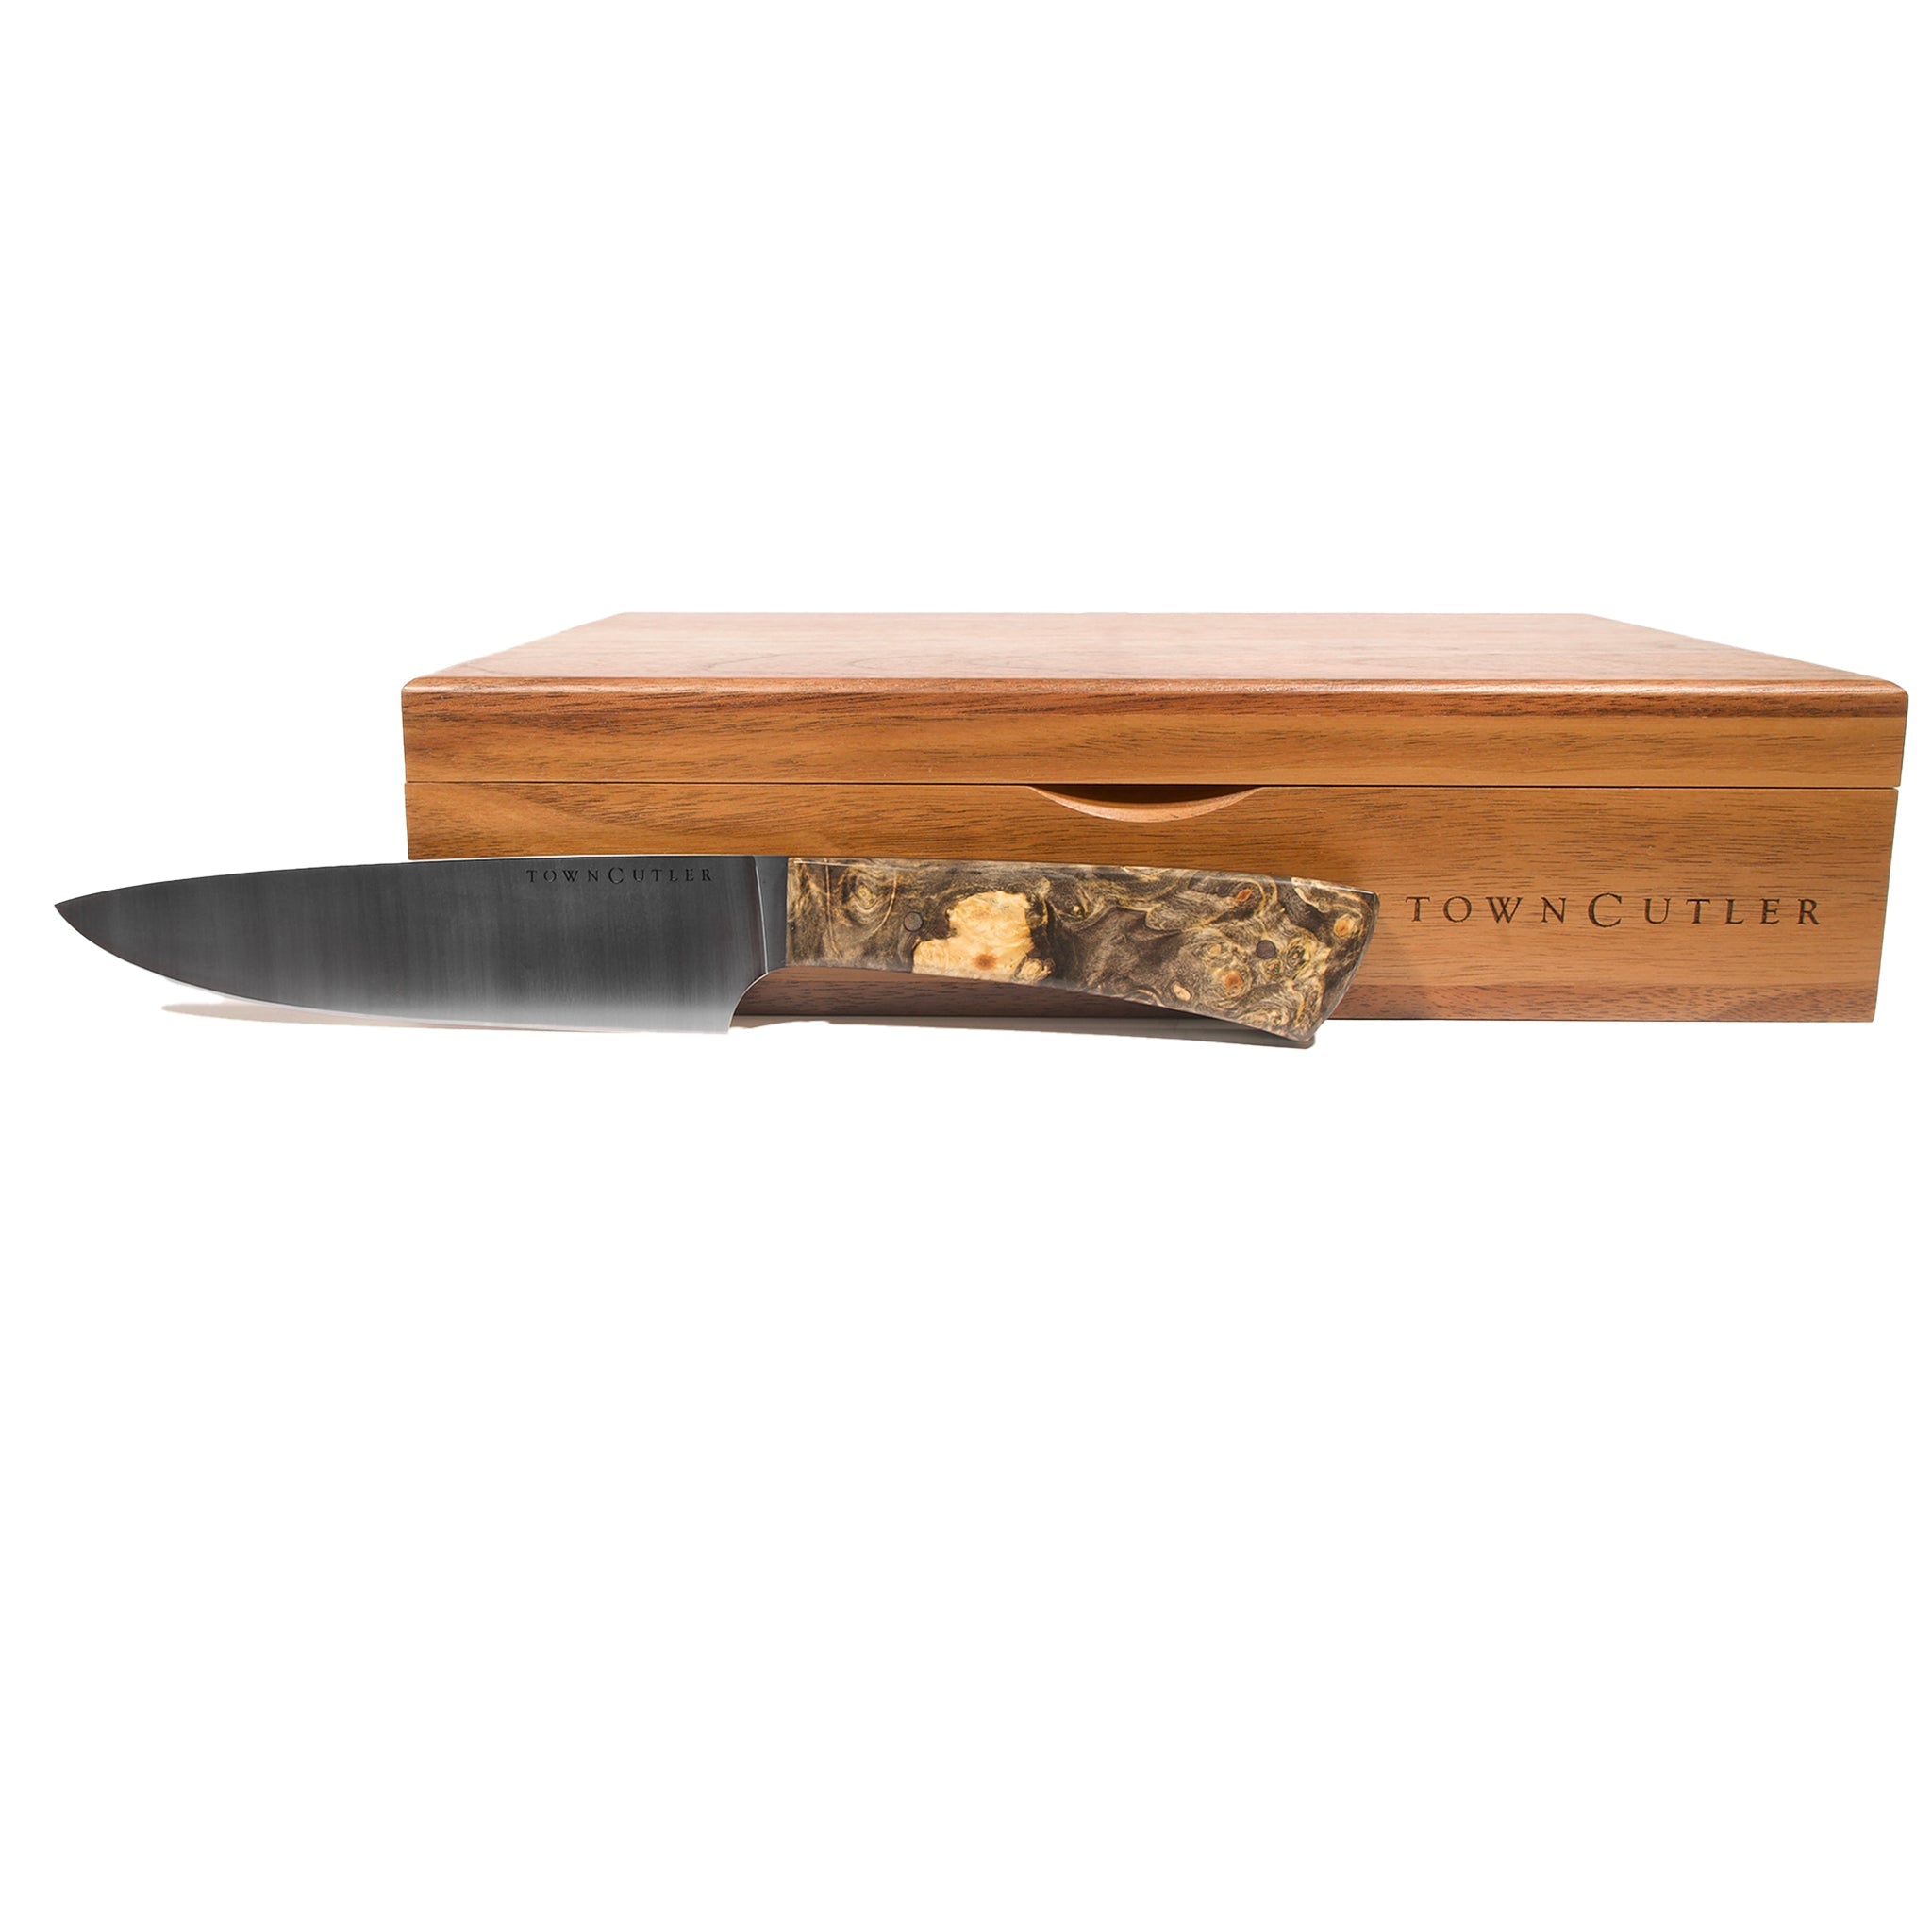 Town Cutler Classic Steak Knife shown with Walnut storage box for set of four steak knives.